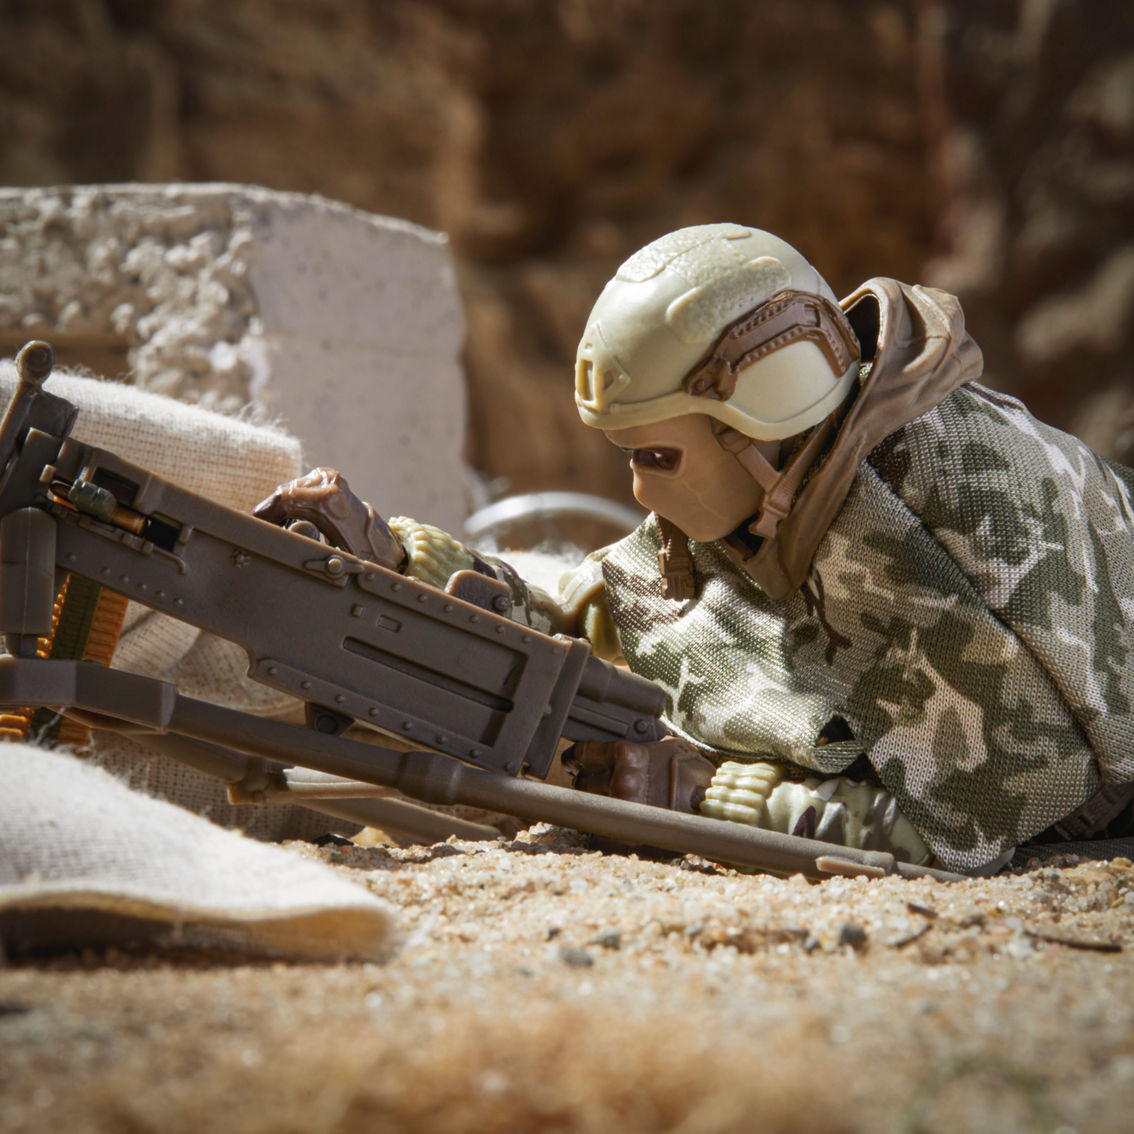 Hasbro G.I. Joe Classified Series 60th Anniversary Action Soldier, Infantry - Image 5 of 5